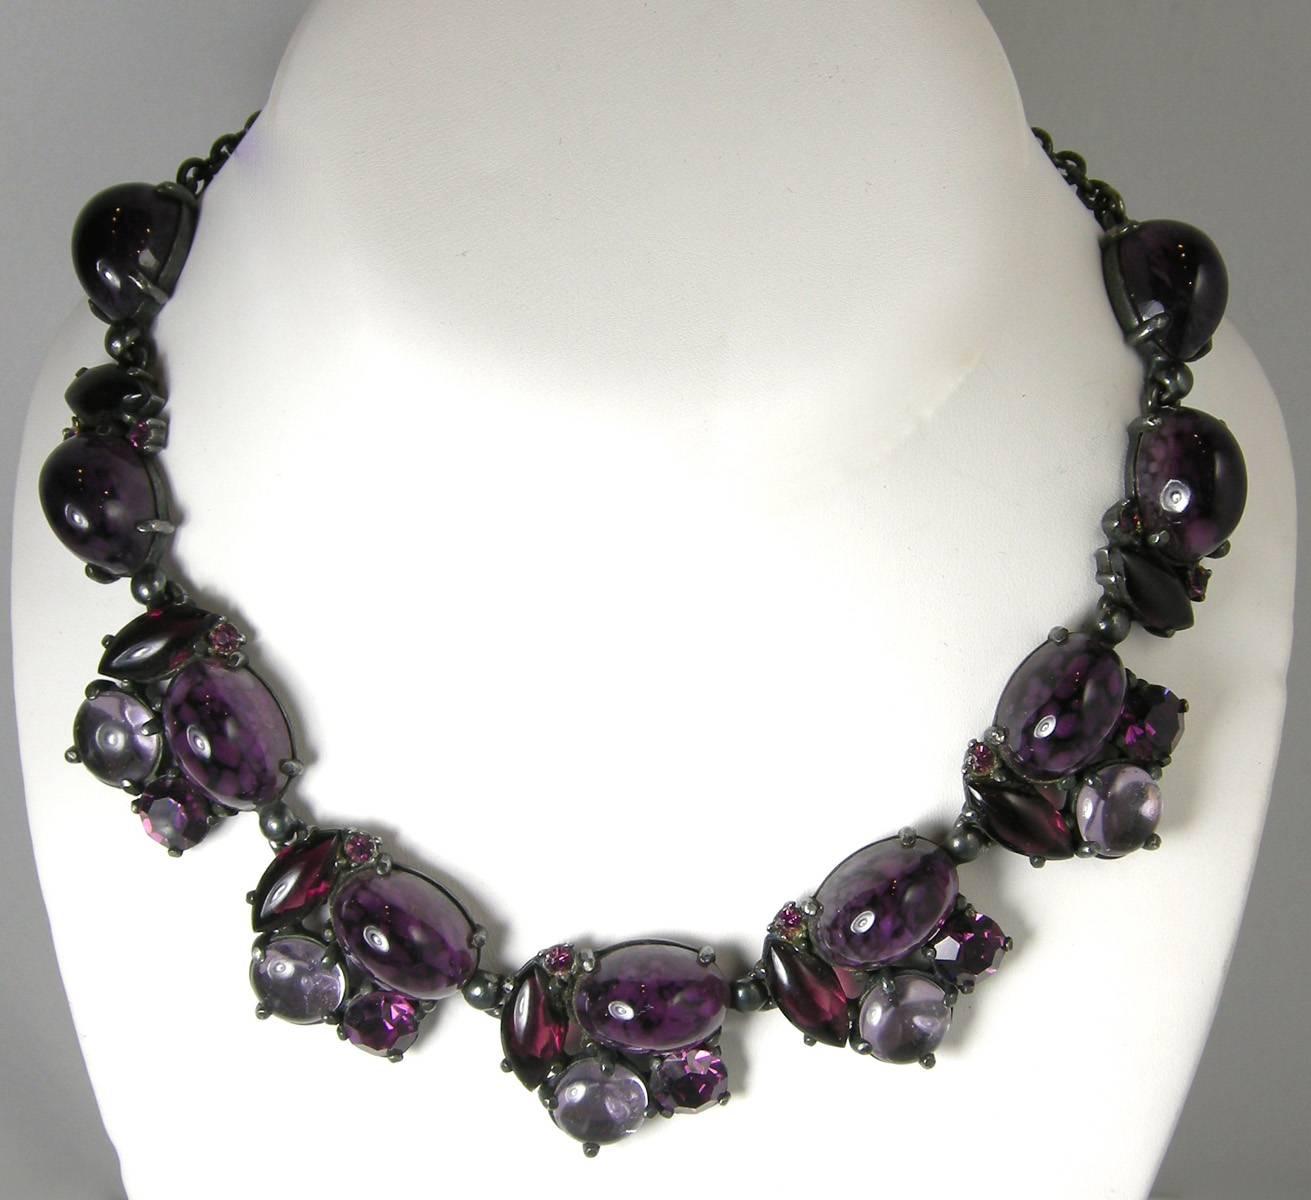 It’s almost impossible to find a full 50s Schiaparelli parure and this one is especially striking with rich amethyst colored glass accented by clear cabochon stones in a Japanned setting.  The necklace measures 16” x 1” with an adjustable hook